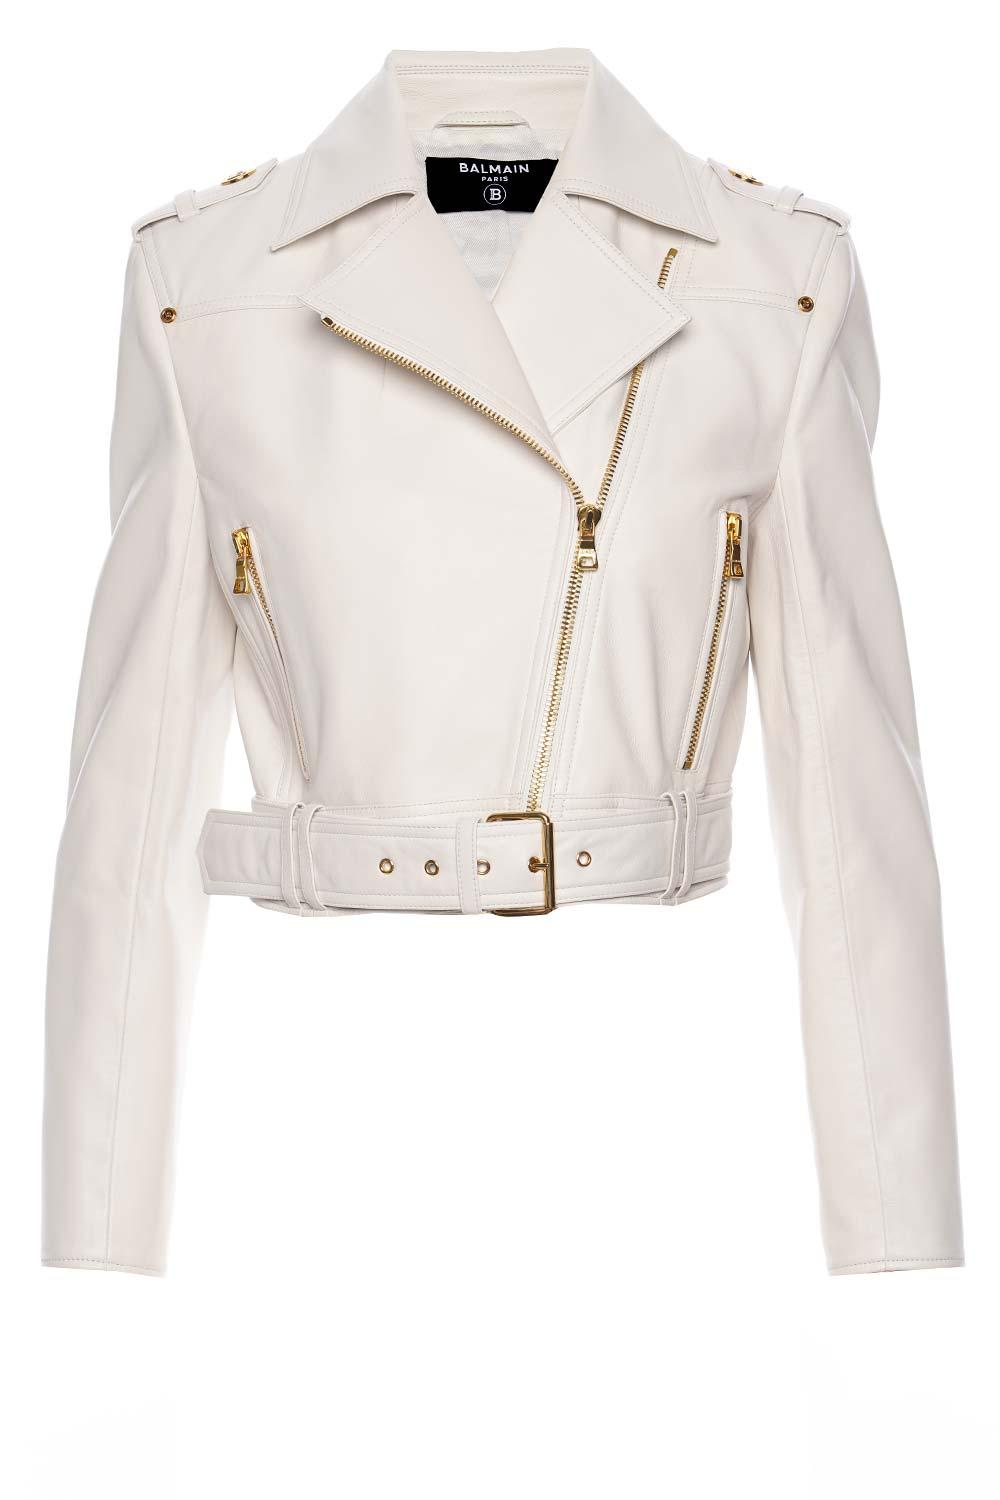 Balmain White Belted Leather Cropped Biker Jacket | Lyst